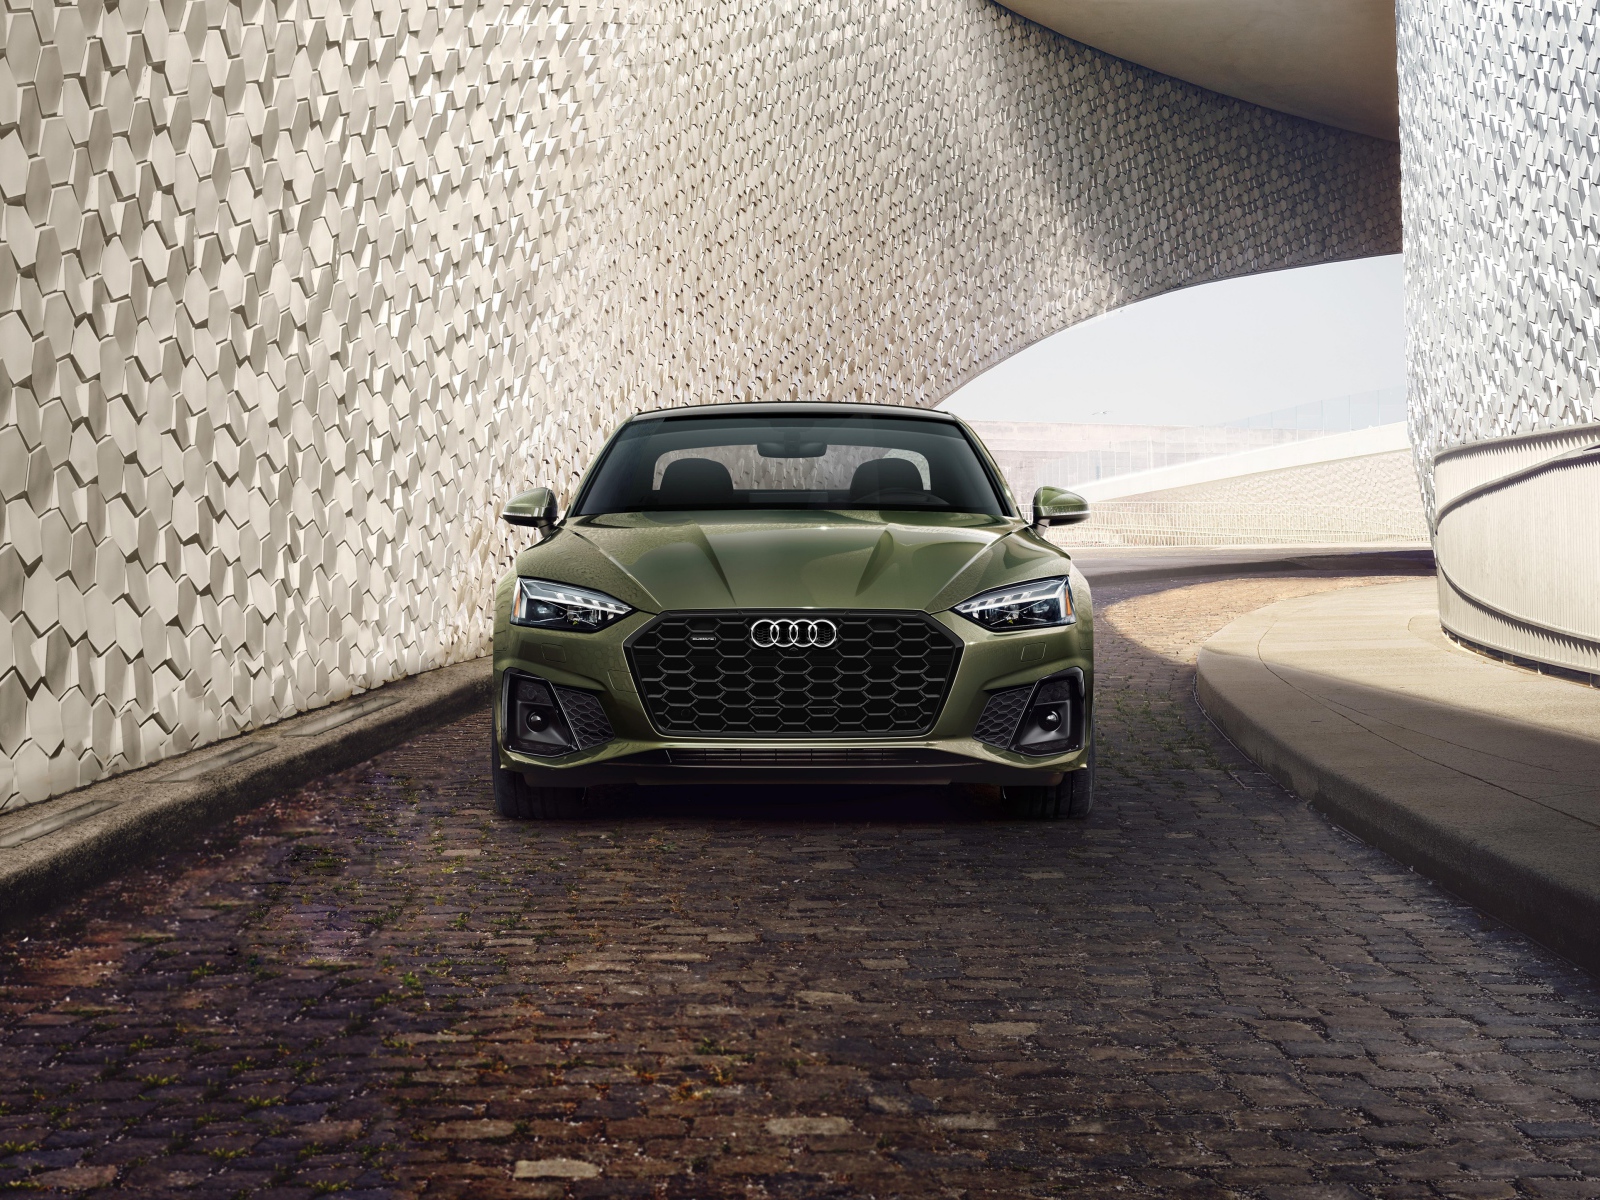 Audi A5 Coupe 45 TFSI Quattro S Line, 2020 in the tunnel